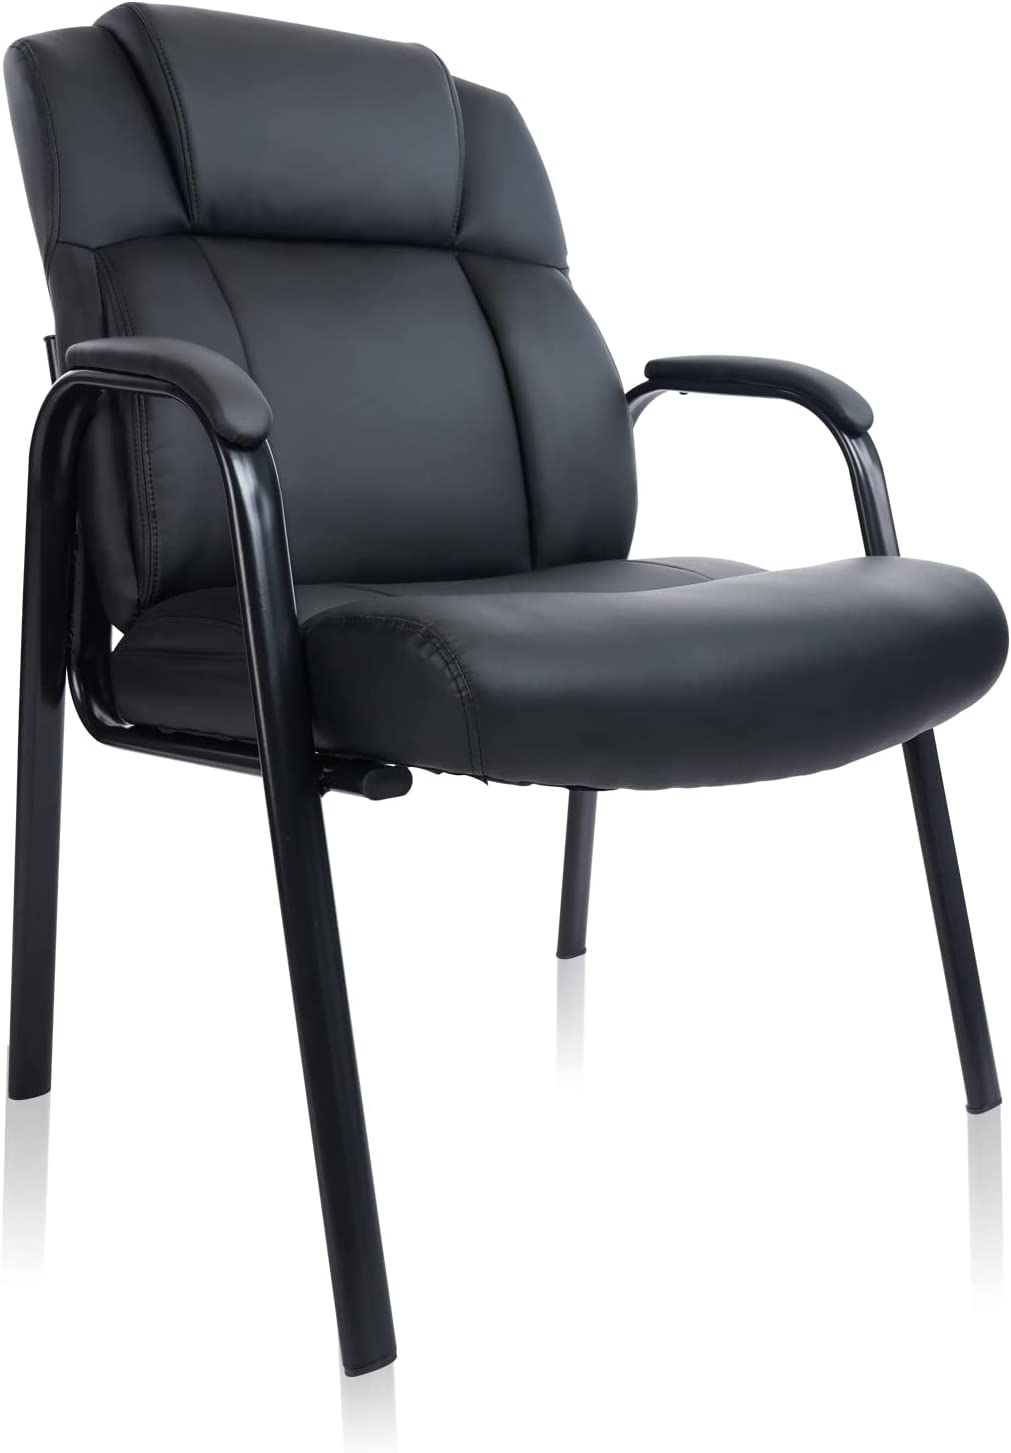 CLATINA Big & Tall 400 lb. Guest Chair, Leather Reception Chairs with Padded Arm Rest for Waiting Room Office Home and Meeting Conference-Black, 1 Pack - image 1 of 8